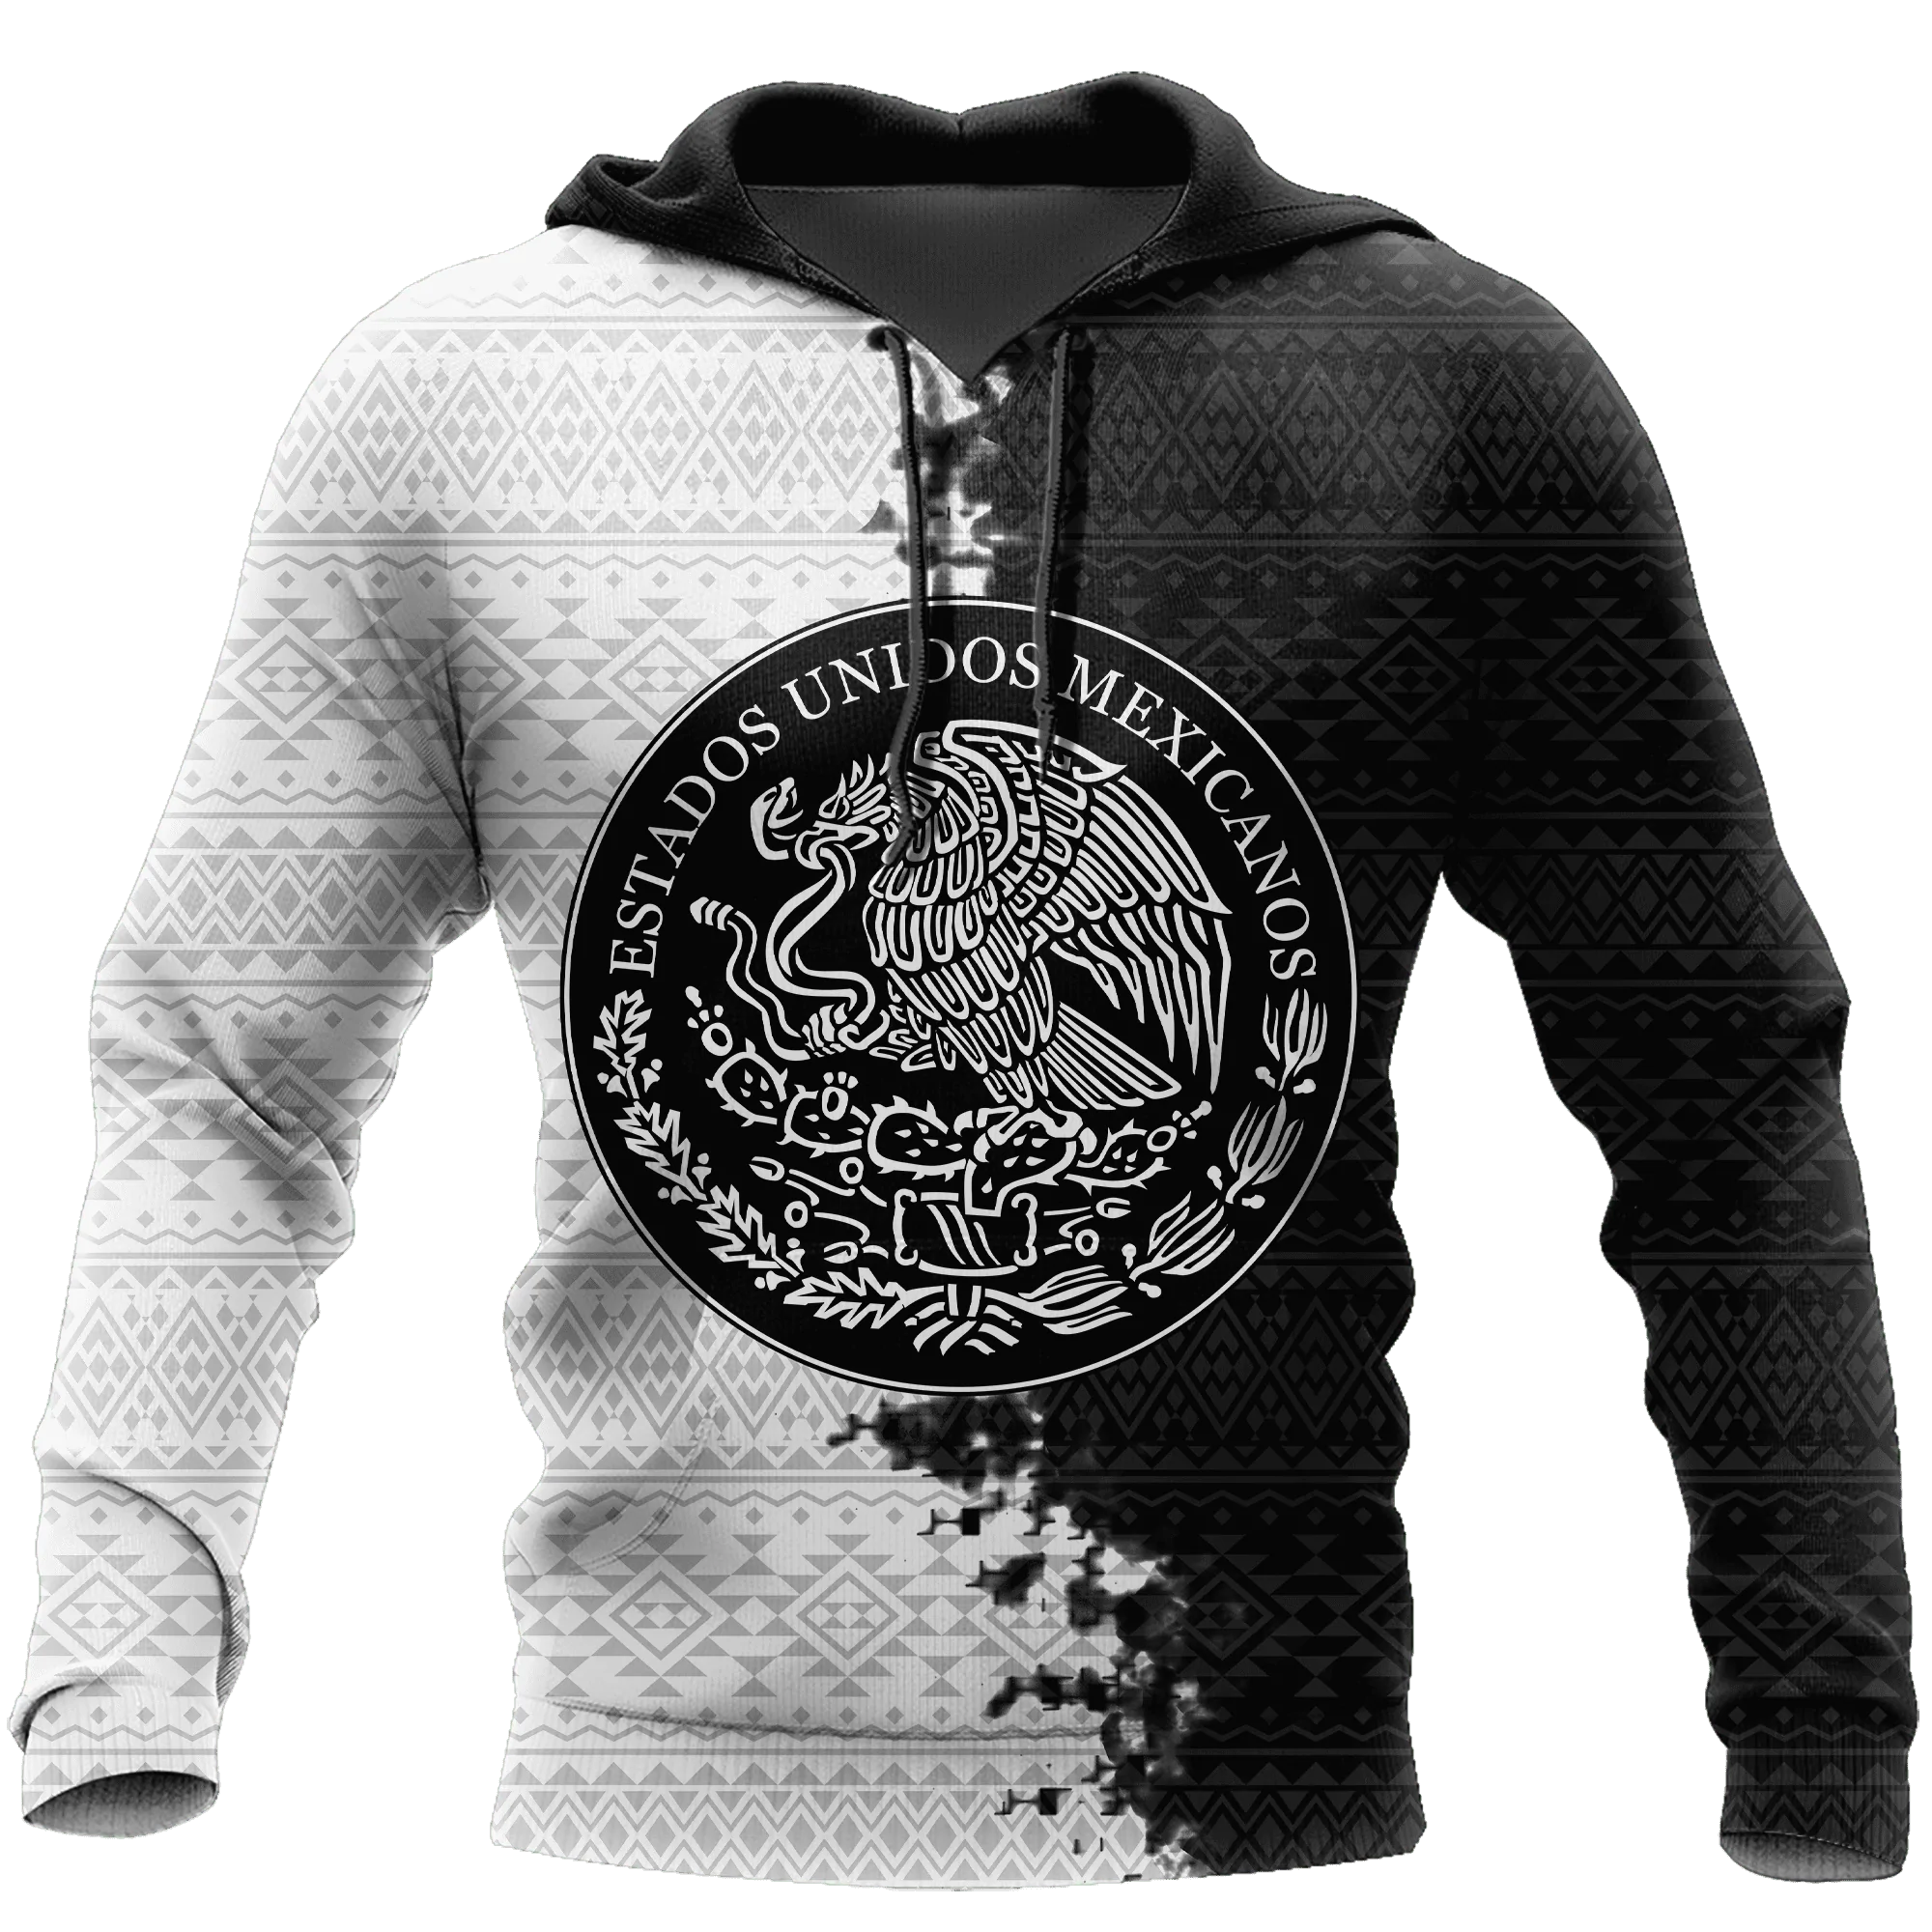 Personalized Mexico Flag Distressed Bleached All Over Printed Unisex Hoodie 3D Mexican Hoodie